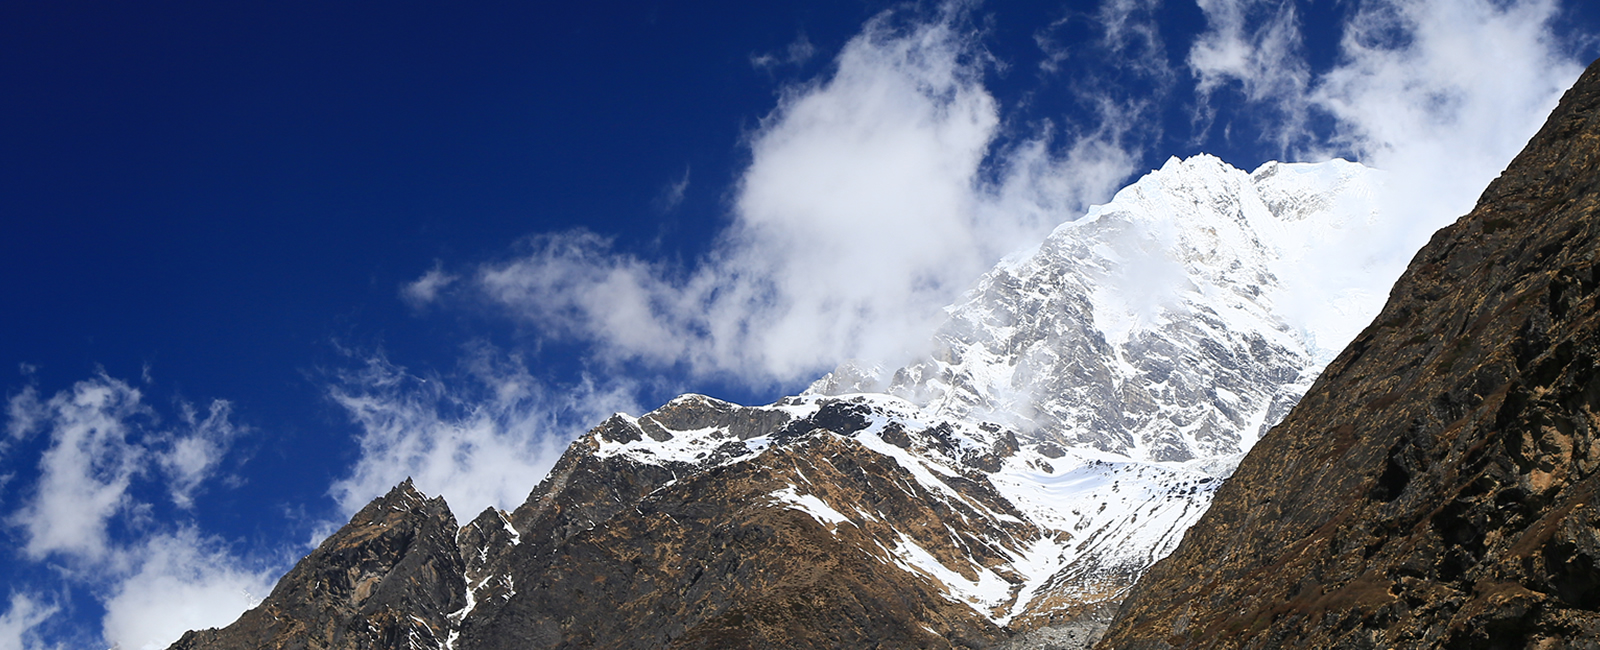 A Complete Guide to Langtang Valley Trek